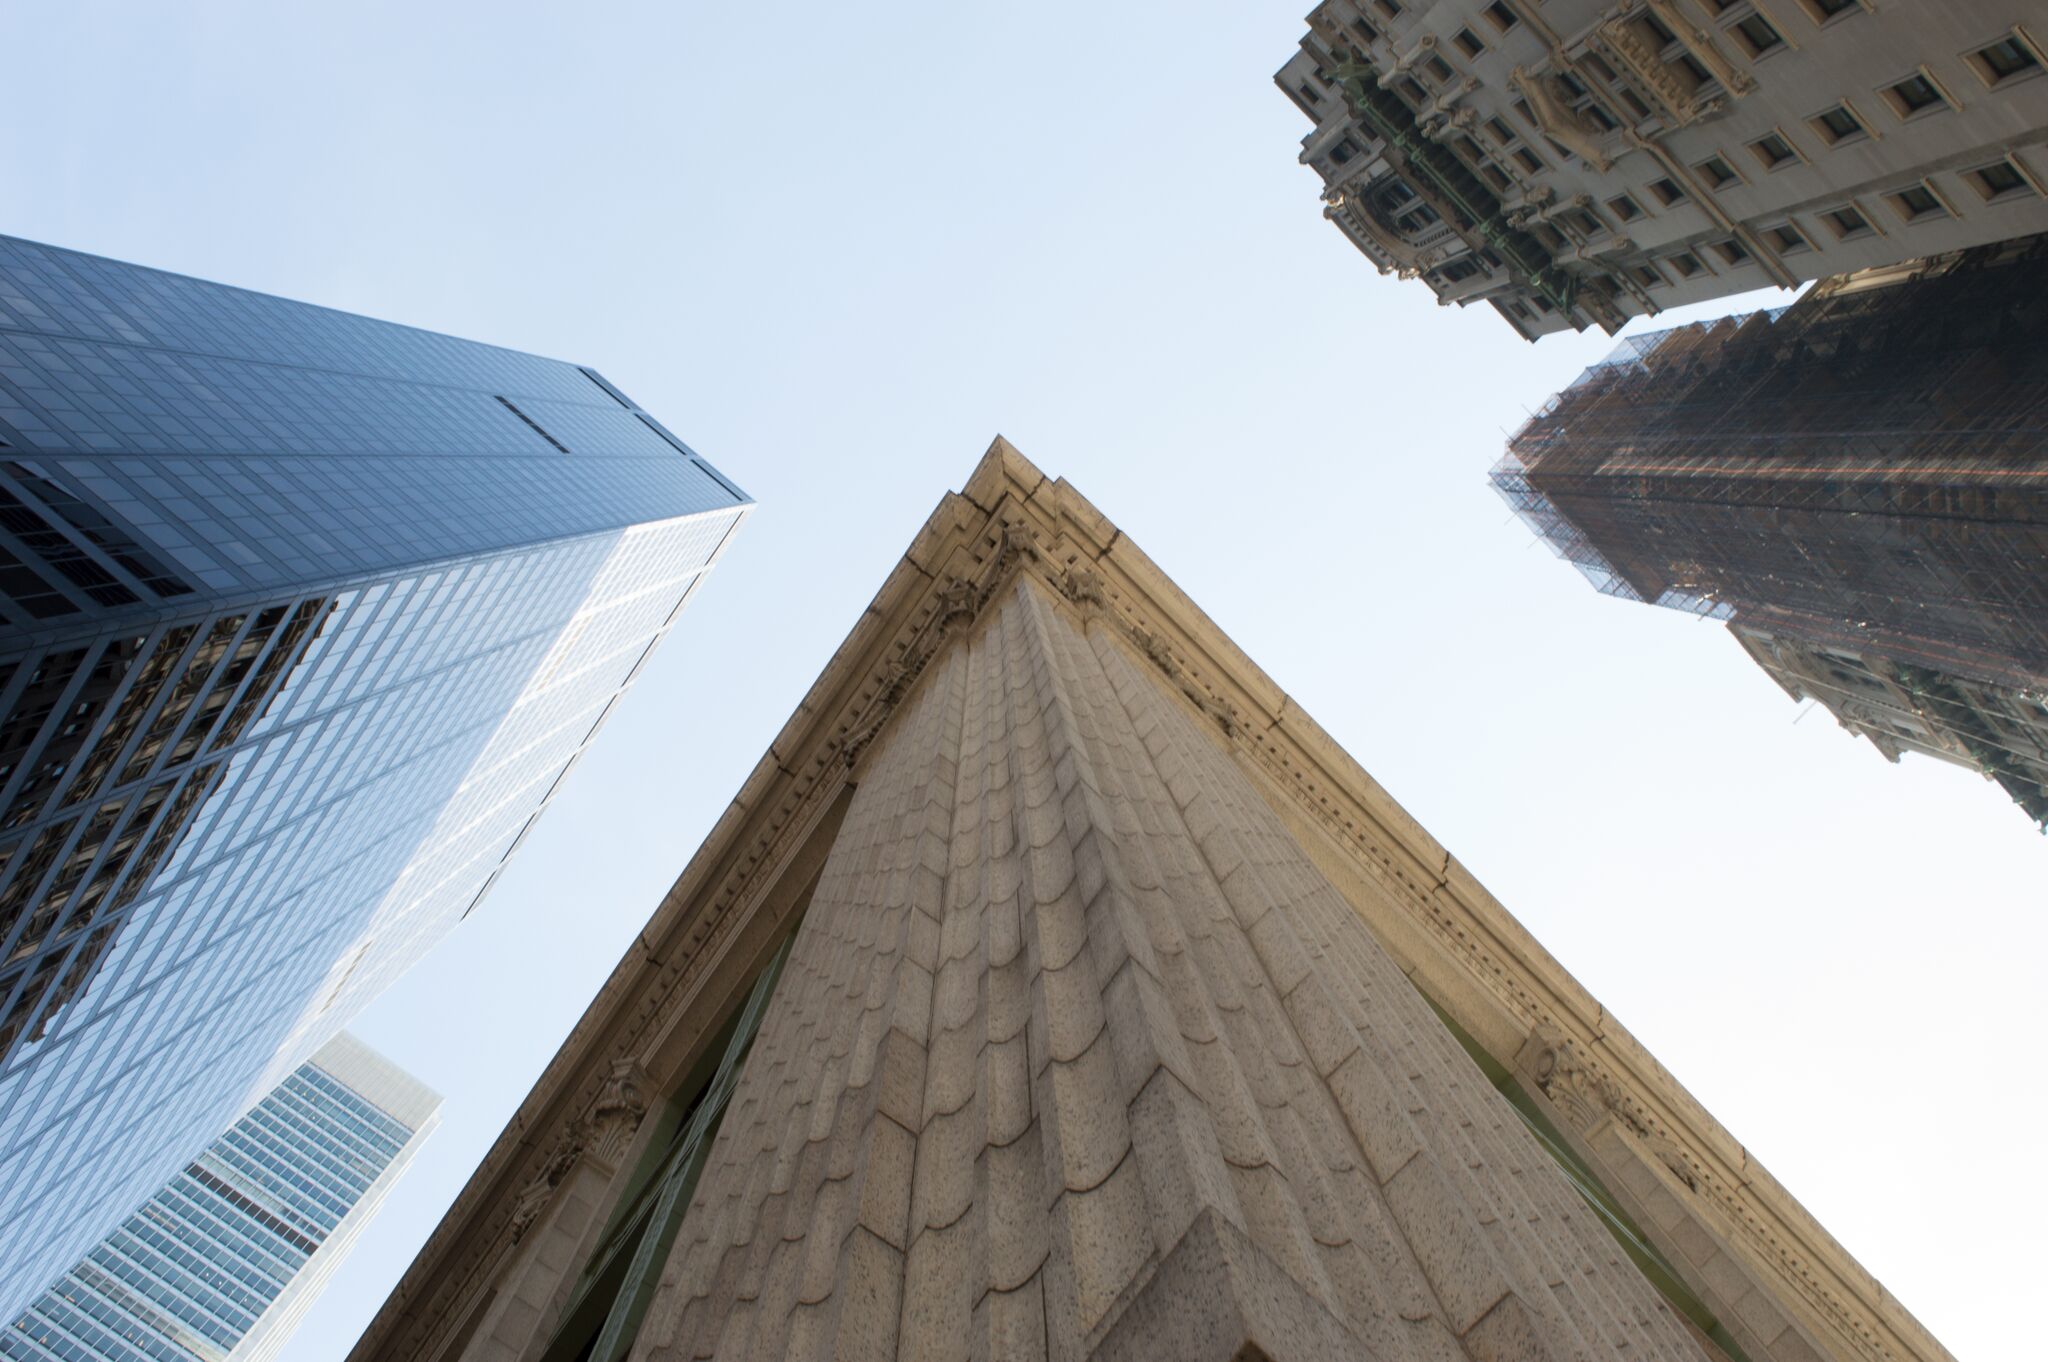 At 120 Broadway, the old Equitable Building becomes new again